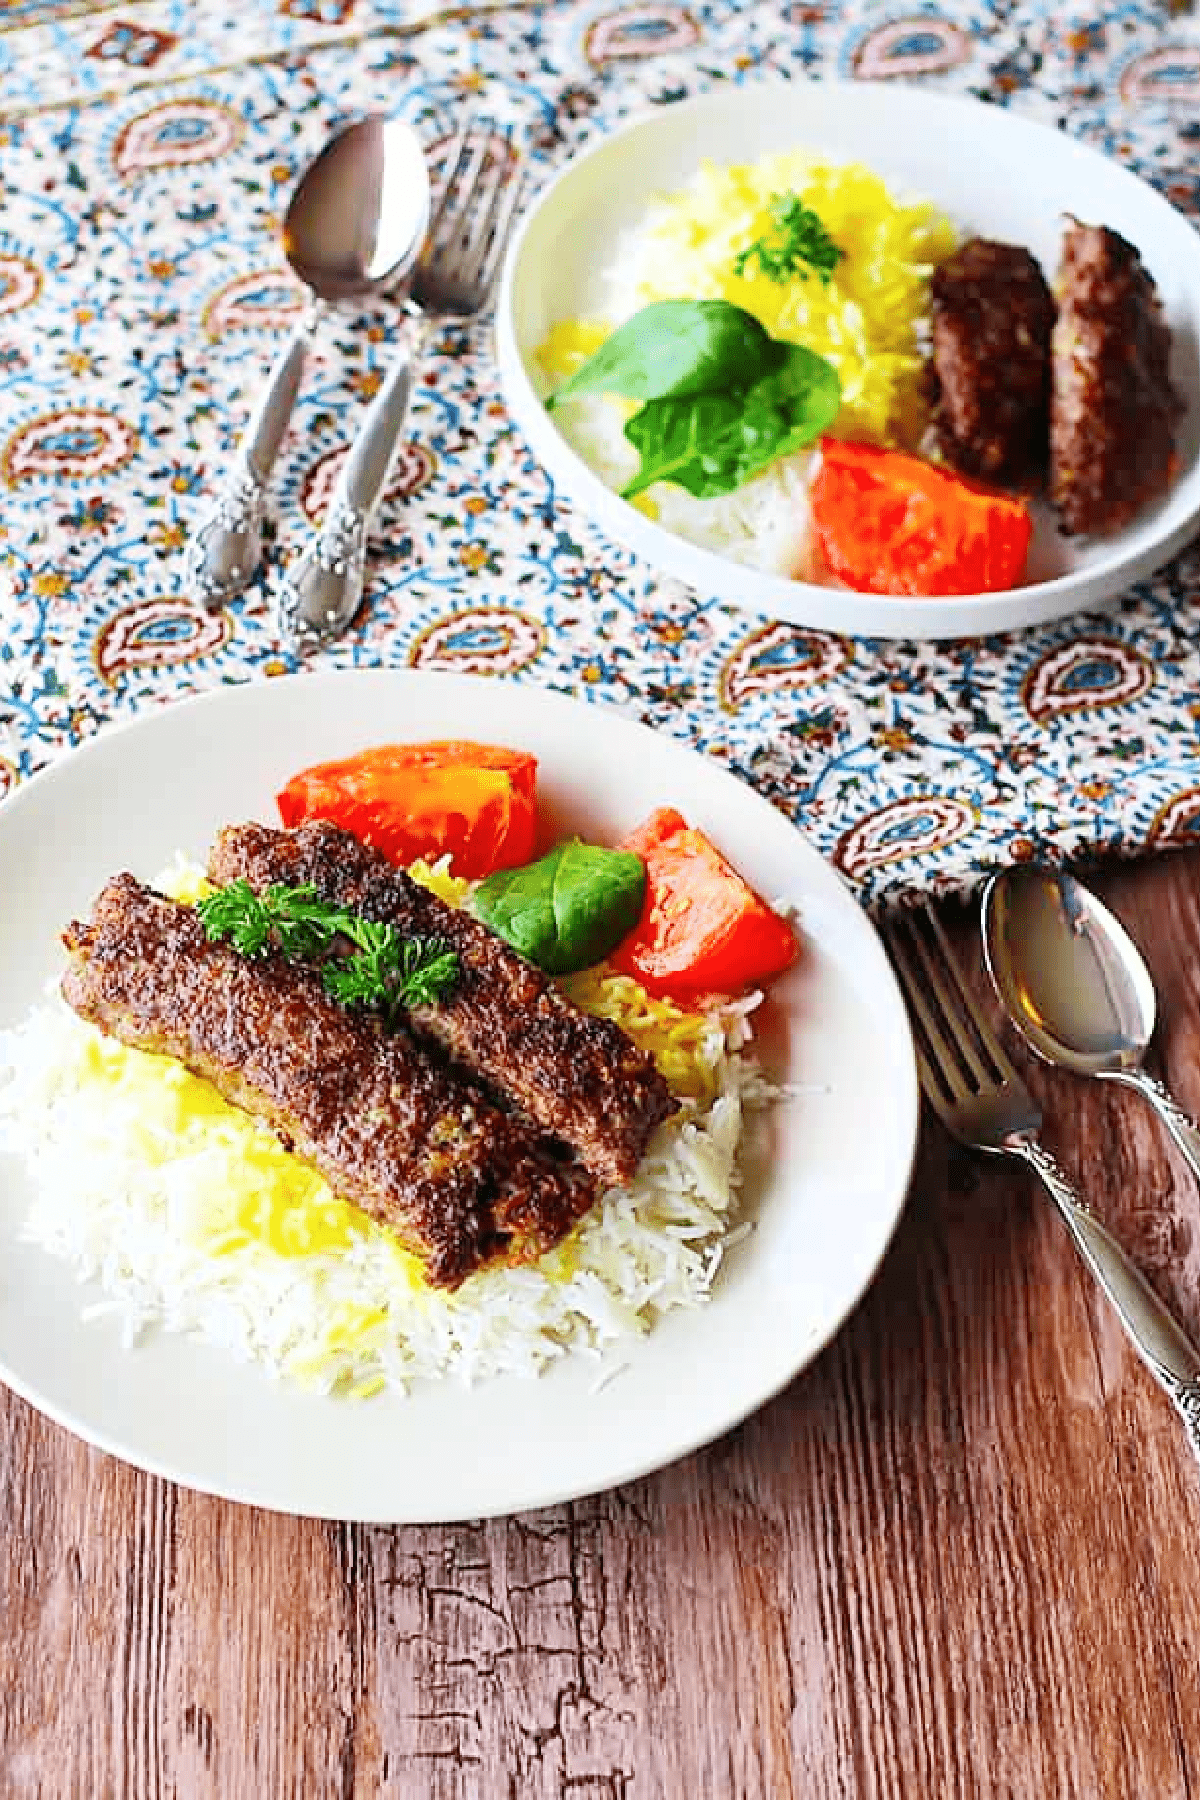 Kabab Tabei is a delicious dish that you can make if you like to have kebabs but you don't want to use a grill or you don't have one. It's simple and can be ready in an hour with a handful of ingredients!
